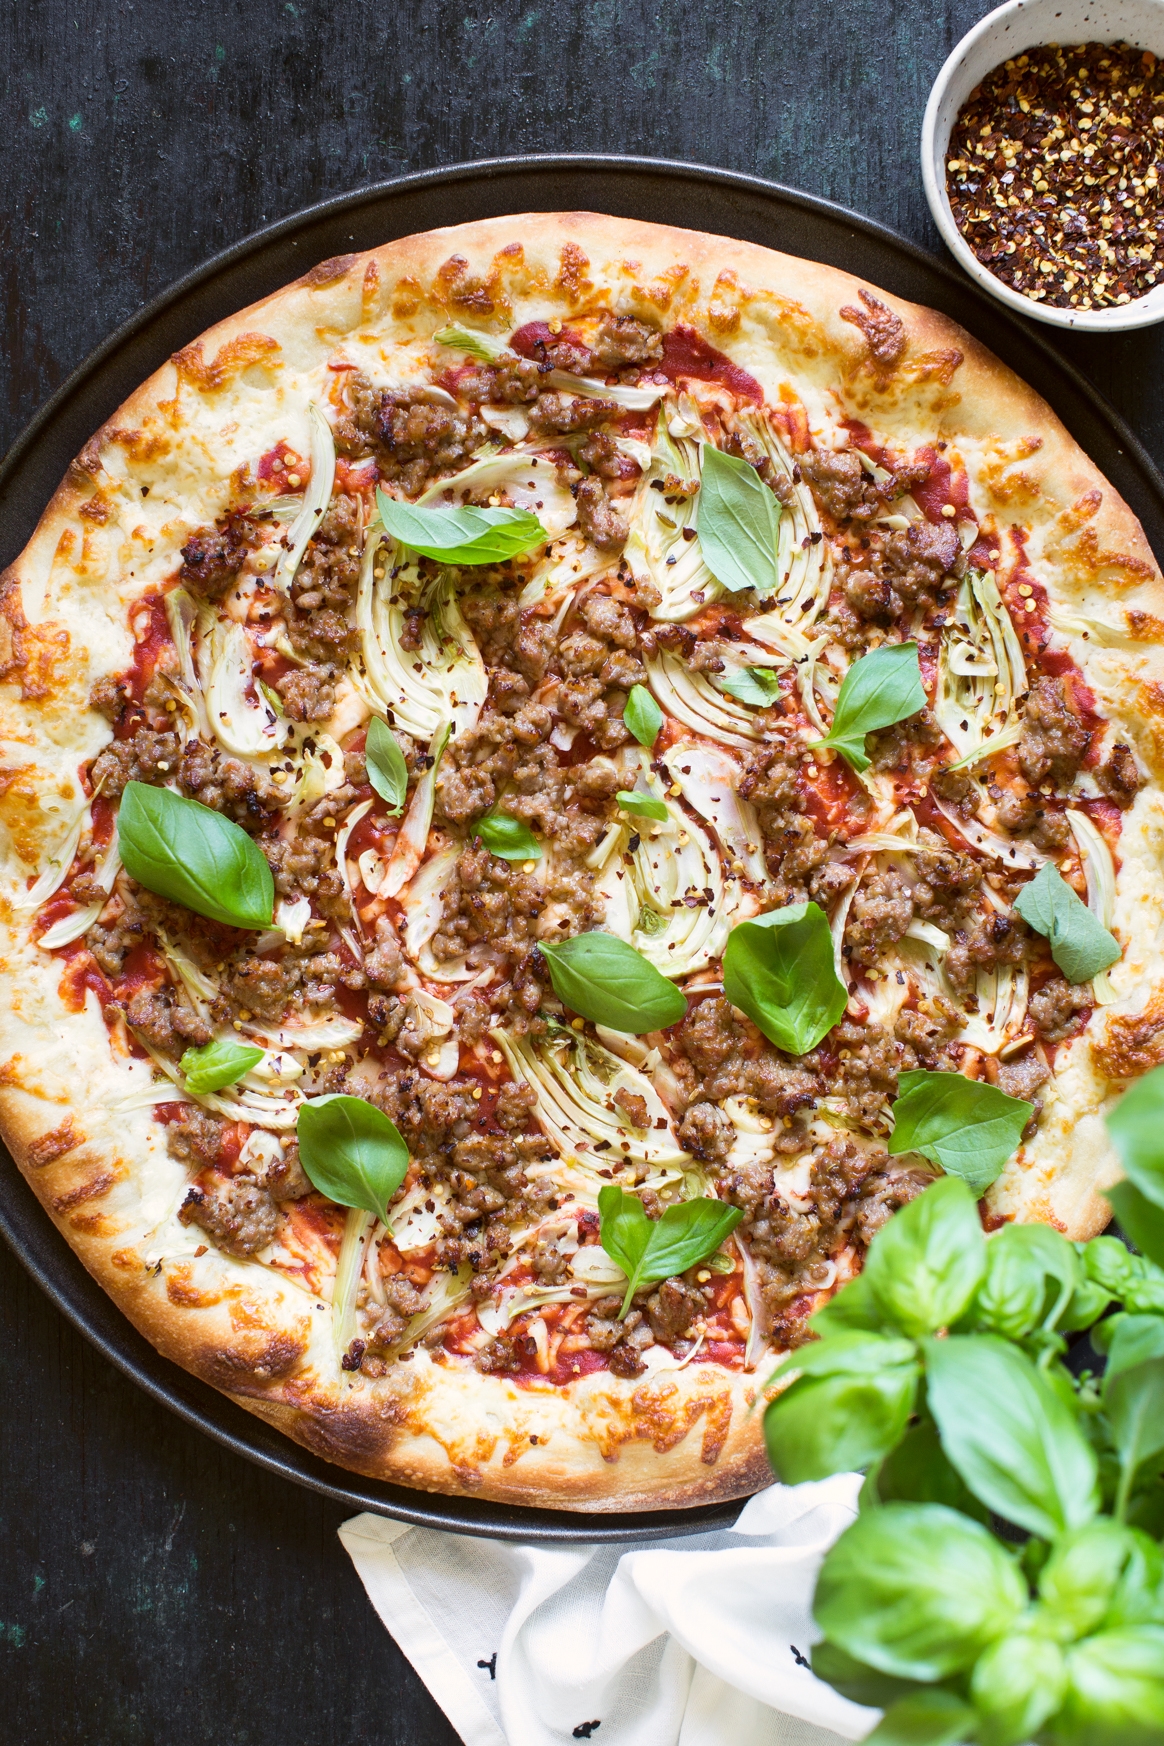 https://www.kitchenkonfidence.com/wp-content/uploads/2018/05/Fennel-and-Sausage-Pizza-3.jpg